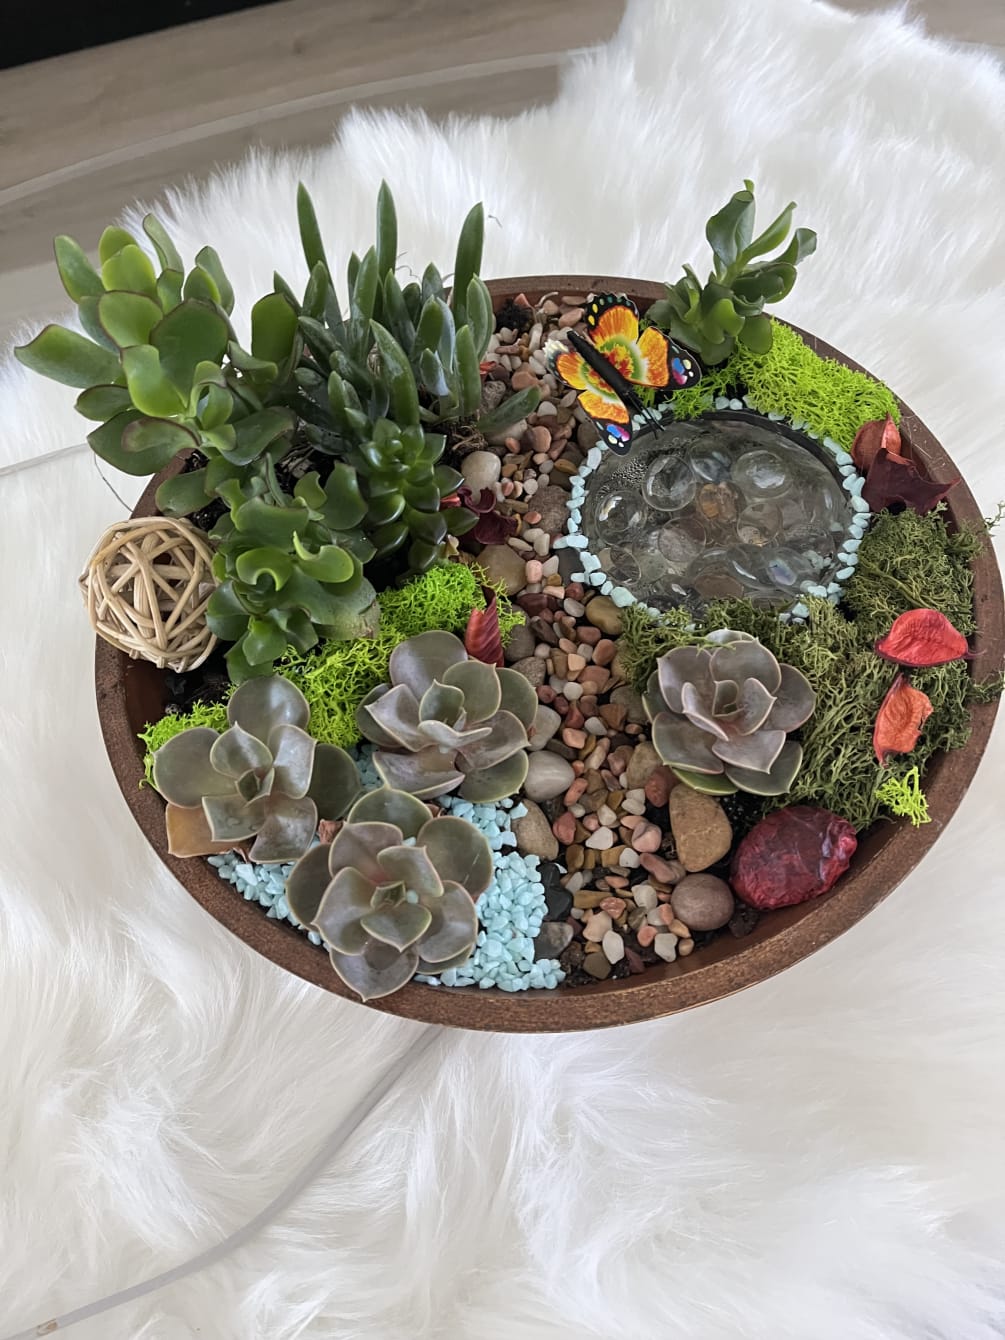 Plants and succulents also fill your home with peace and harmony. It